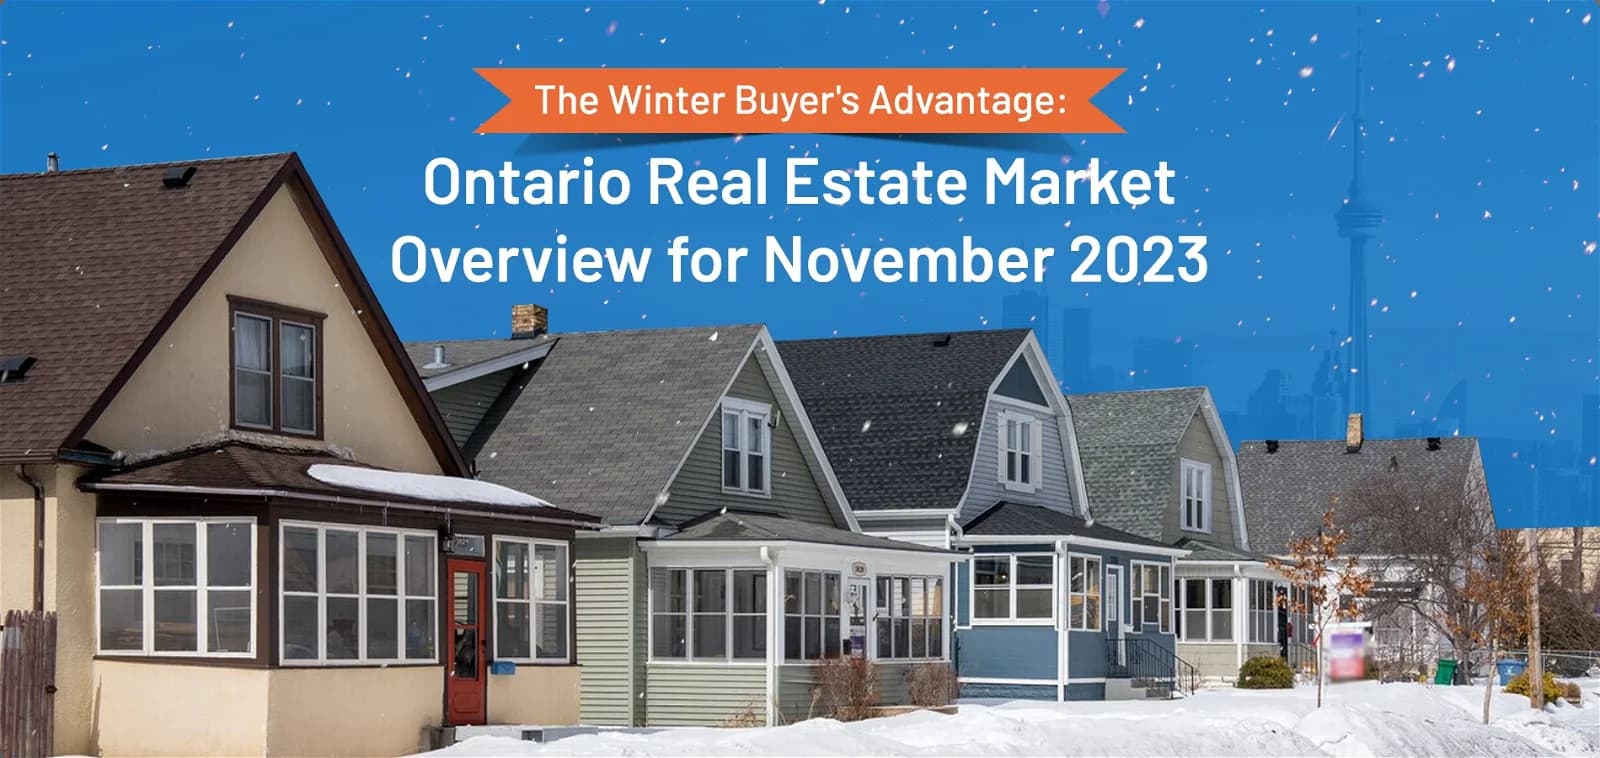 The Winter Buyer’s Advantage: Ontario Real Estate Market Overview for November 2023